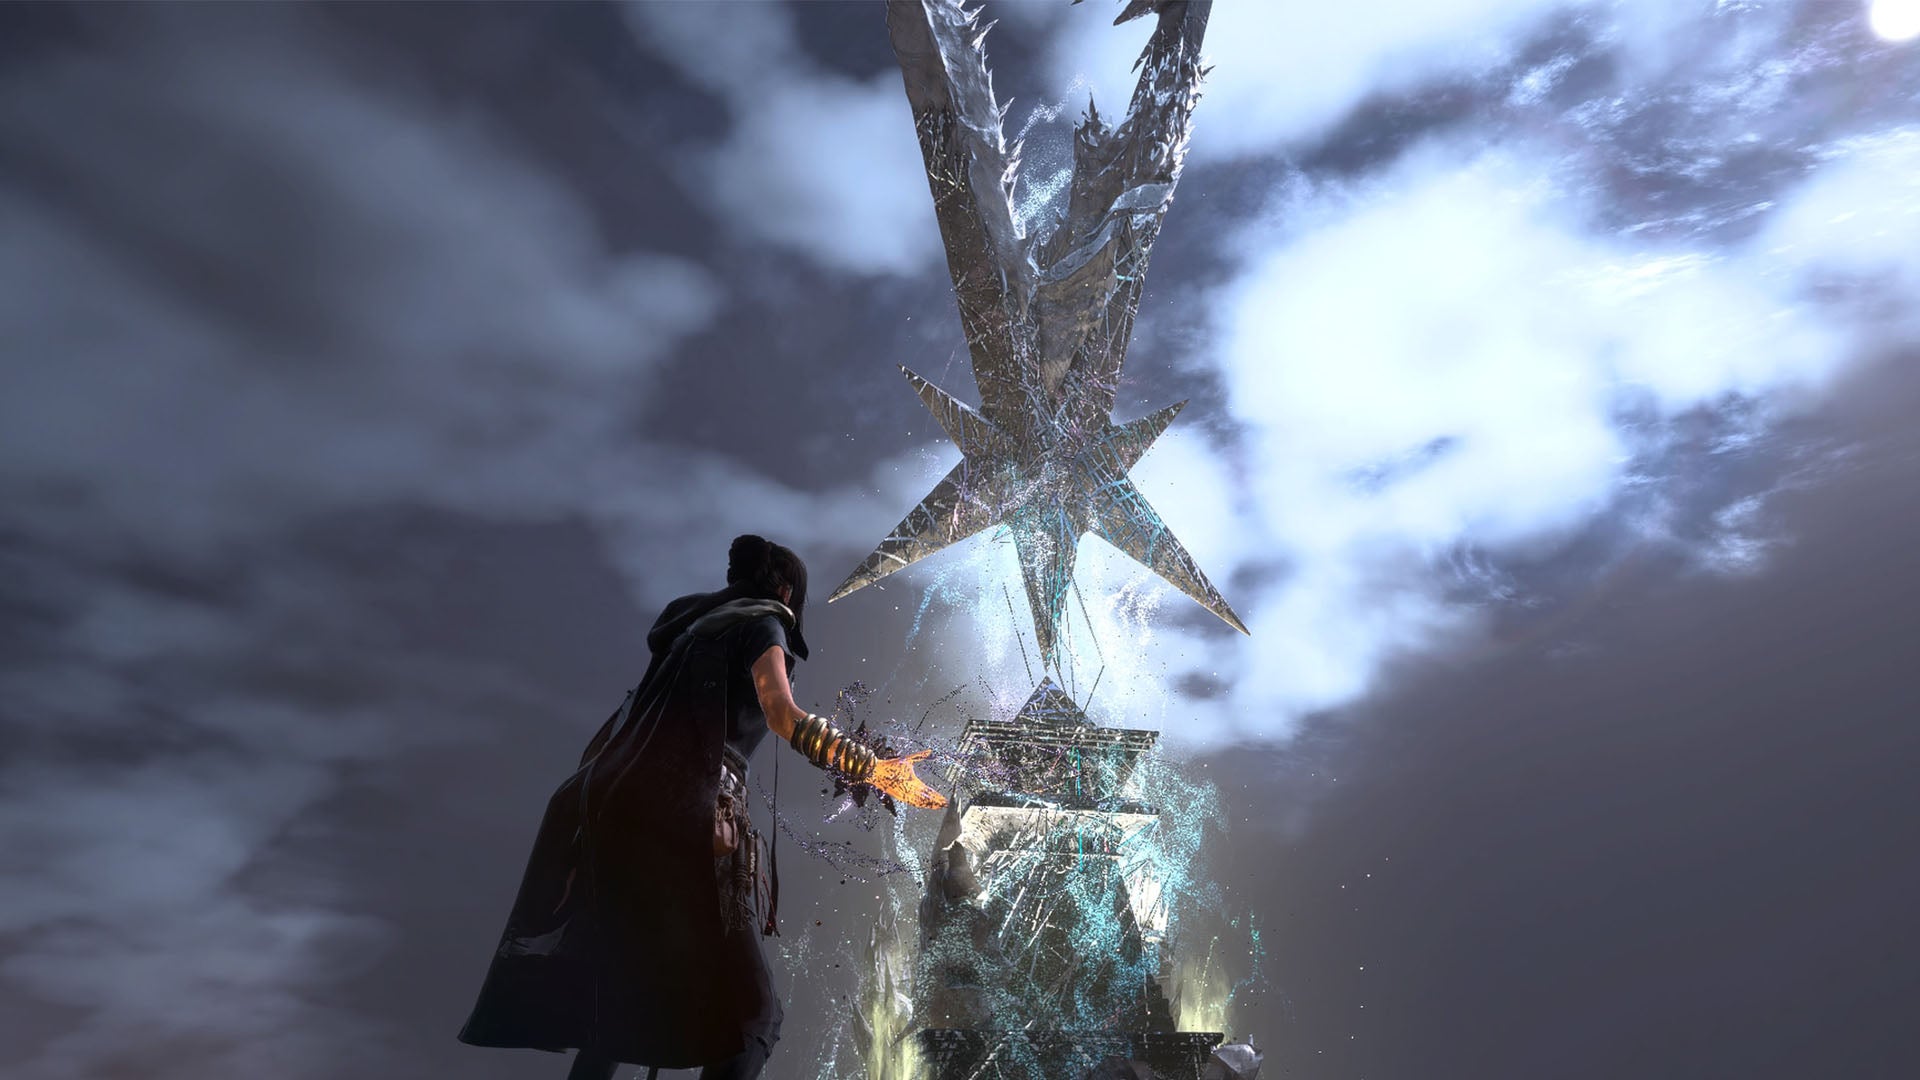 Forspoken, Frey is charging an attack spell to use on the Monument